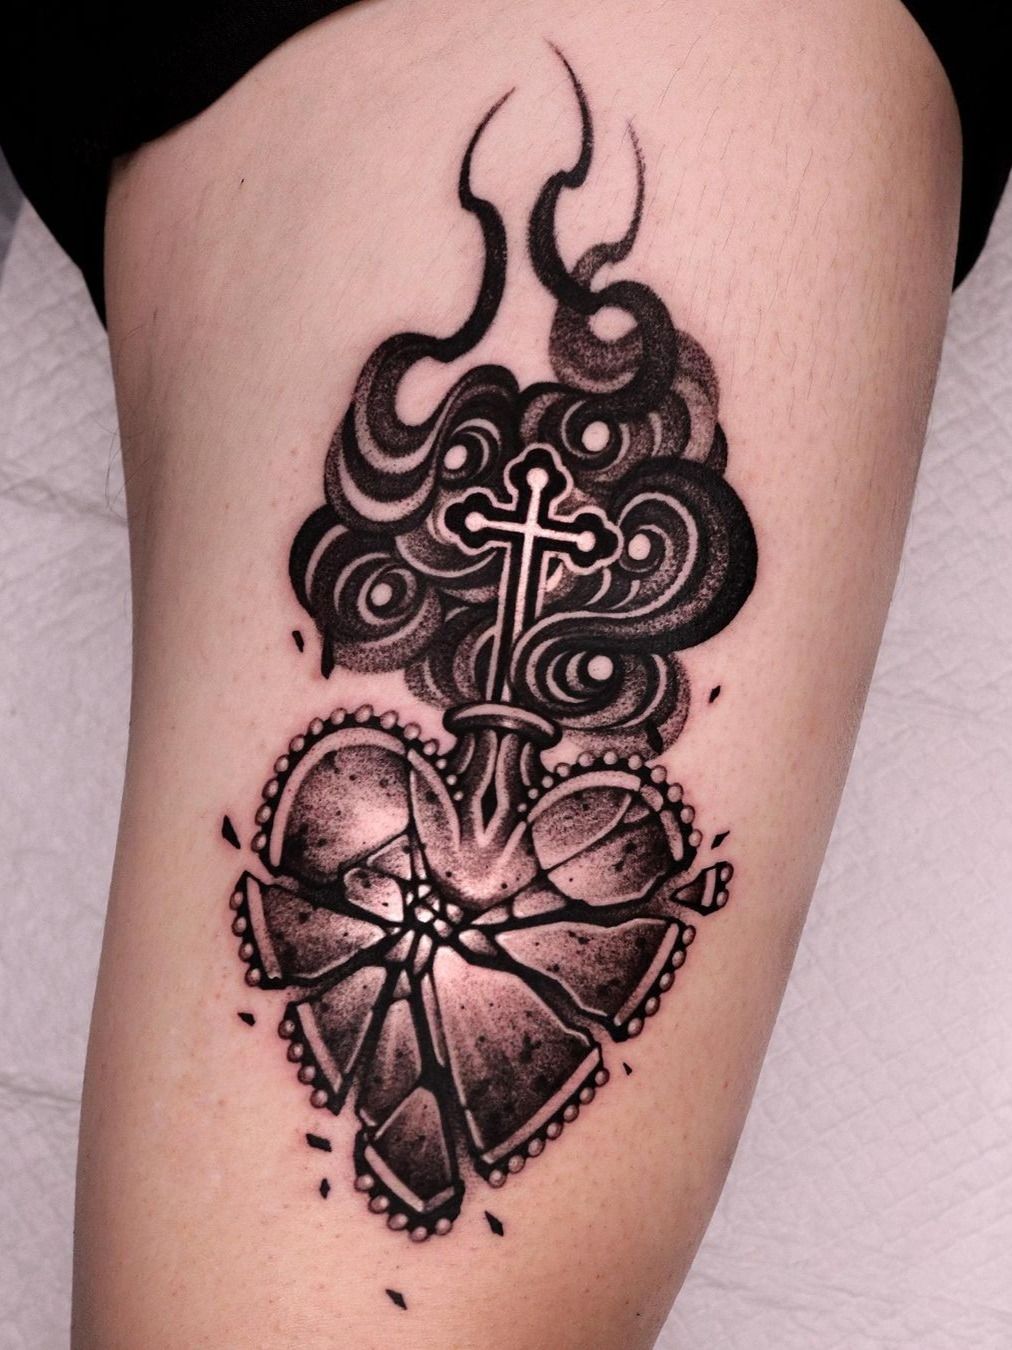 Small cross and heart tattoo on the left wrist